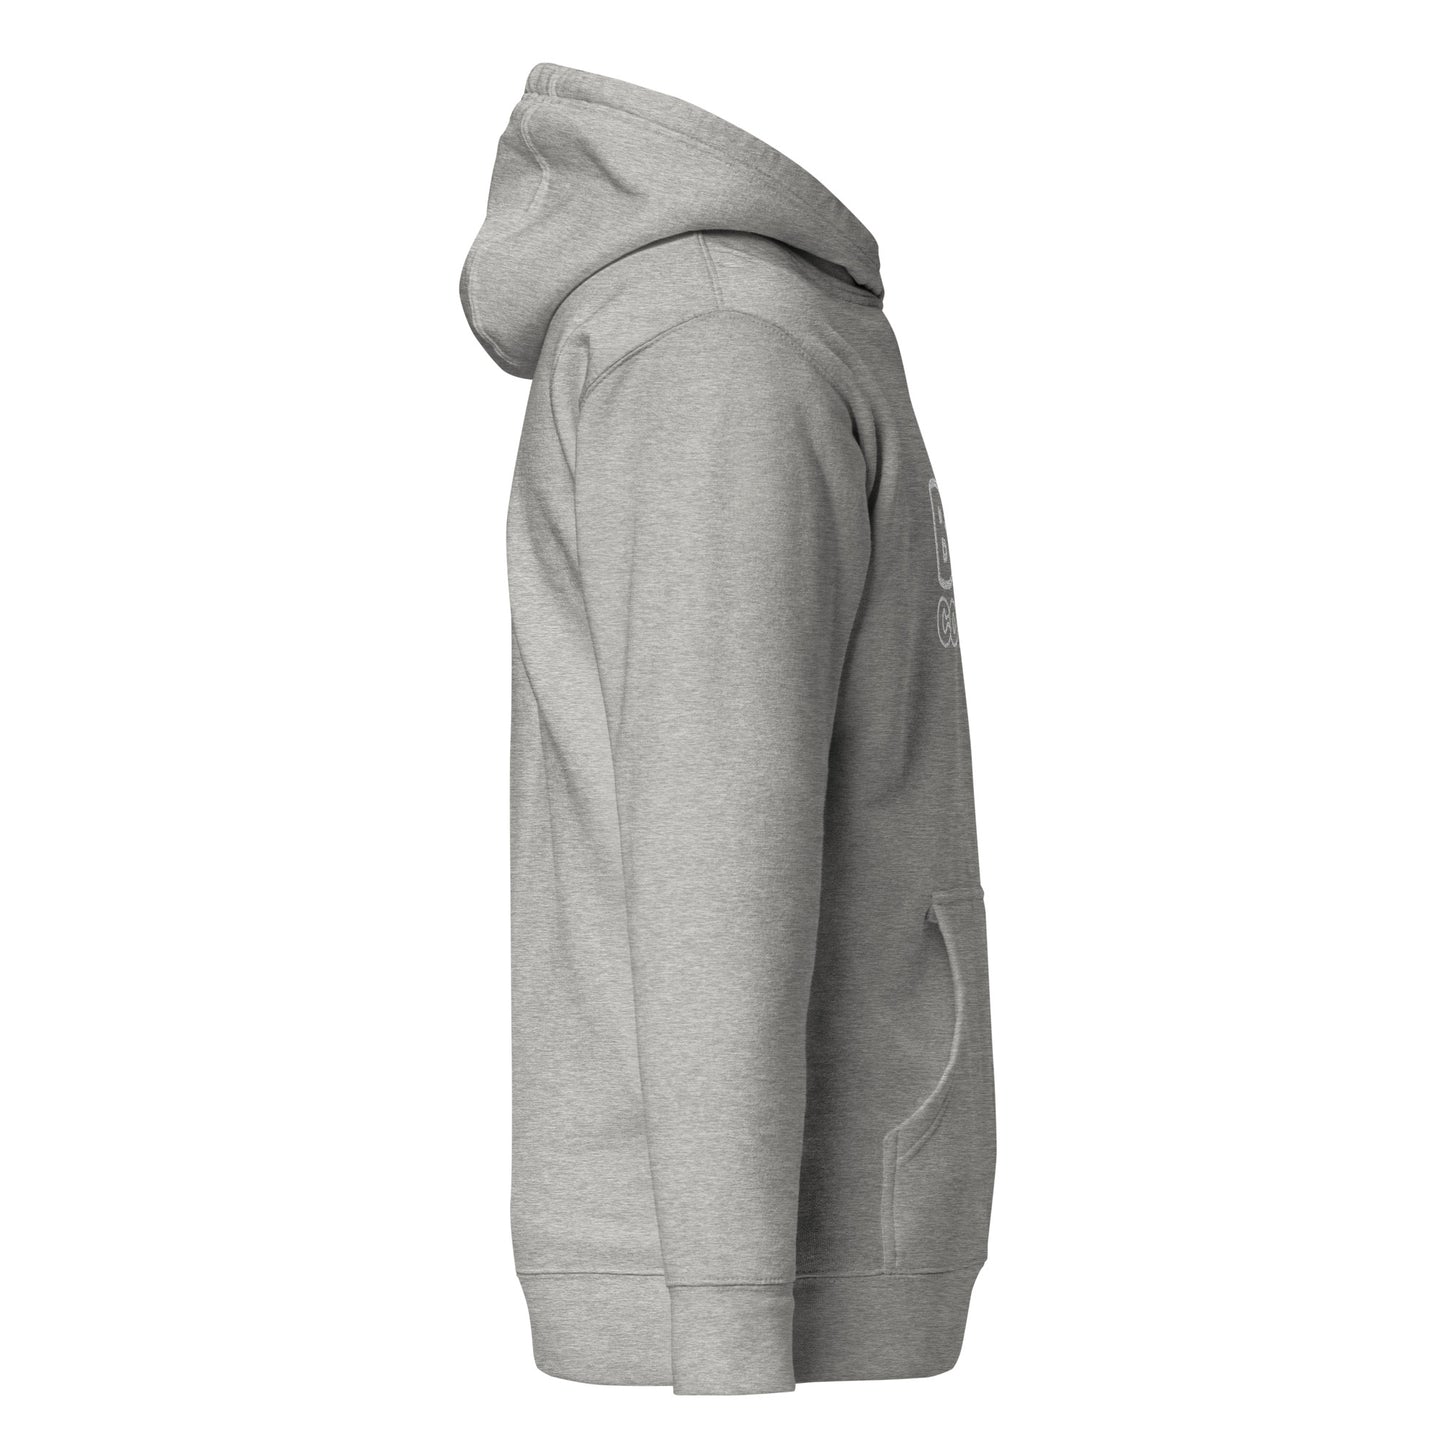 The Blend Compadres Unisex Hoodie - Another Bodega